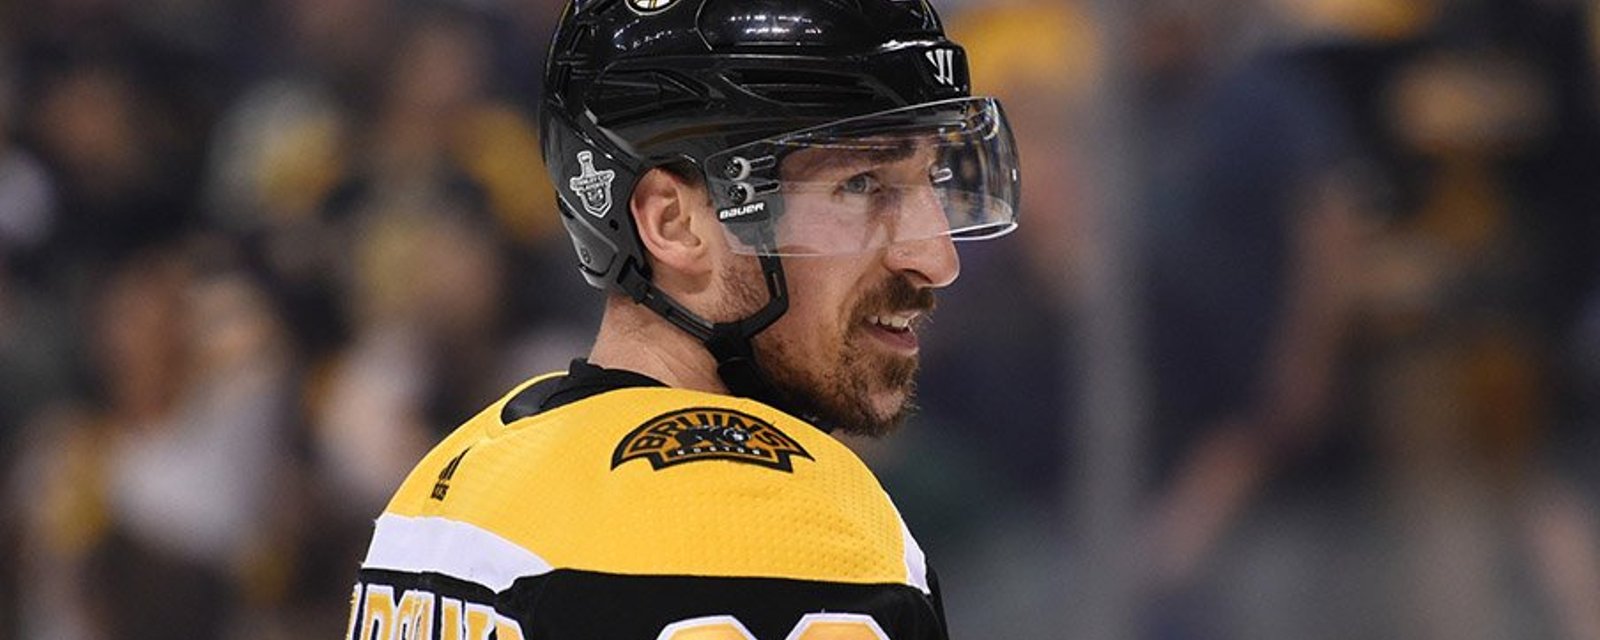 TD Garden employees embarrassed by donations from Brad Marchand and teammates 